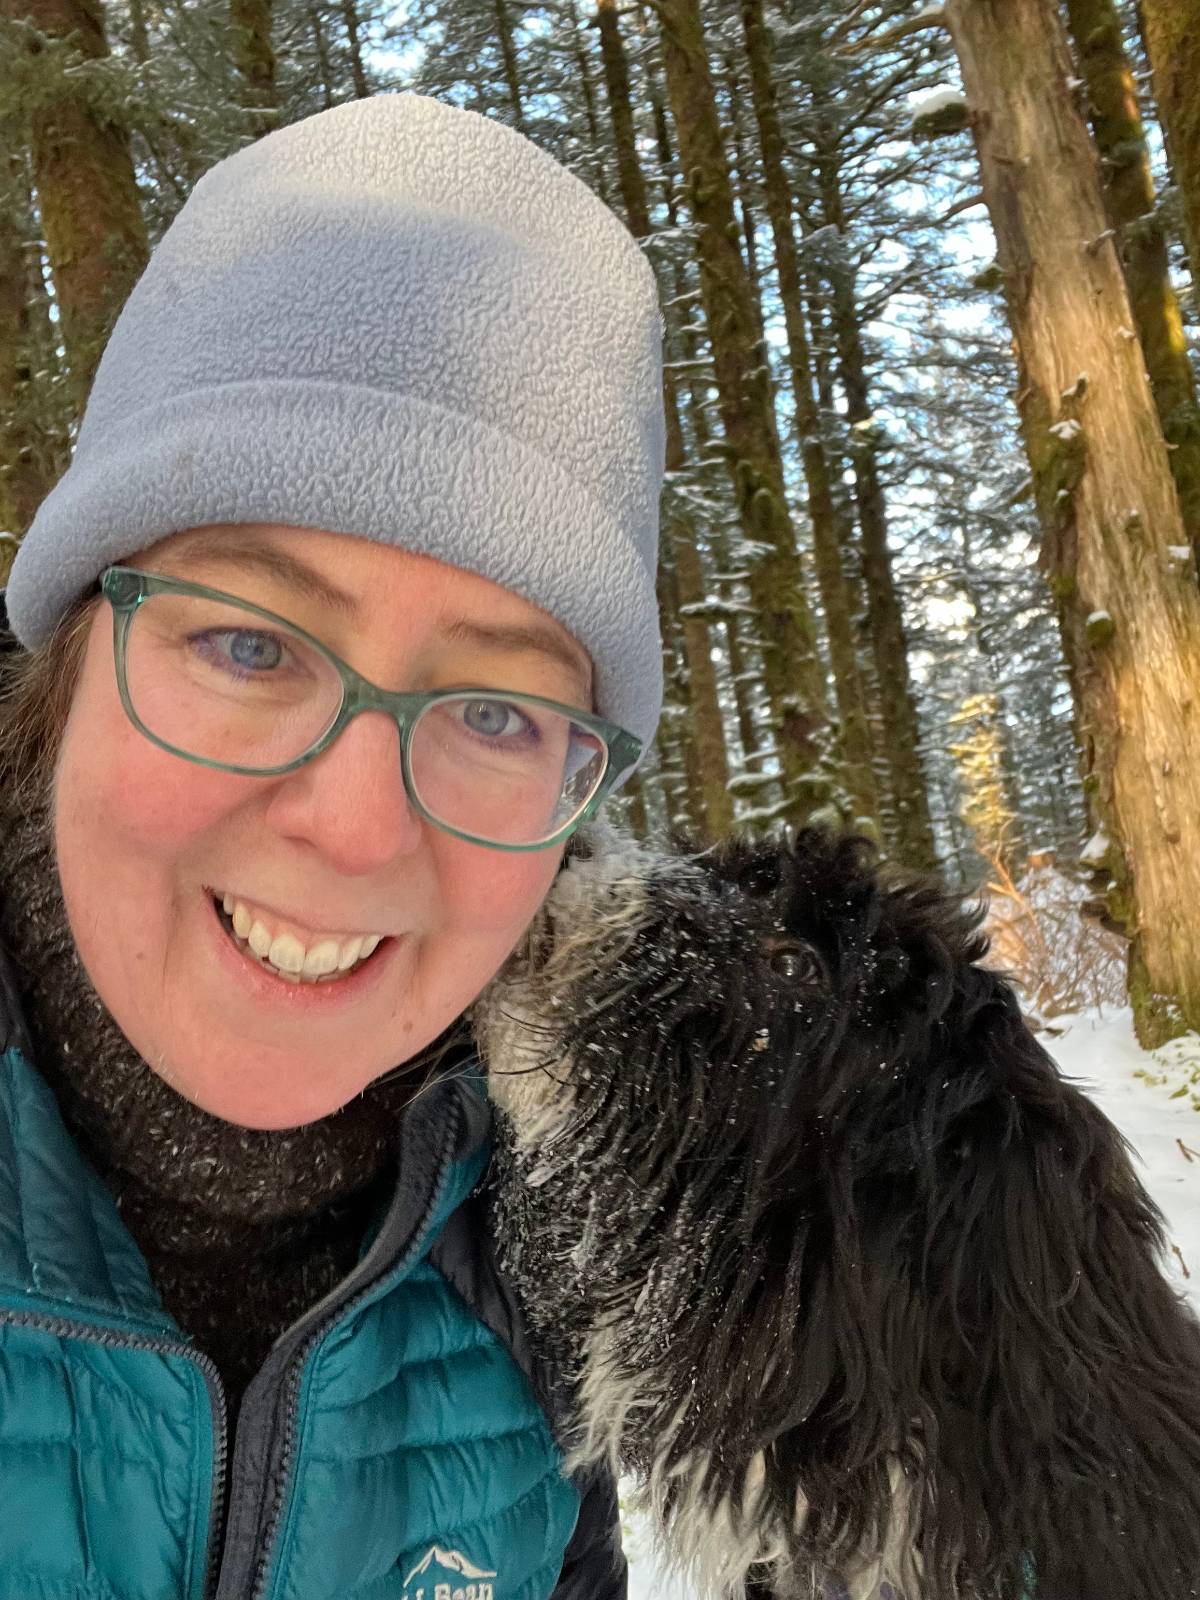 Cindy Trussell in the snow with a black and white dog licking her face